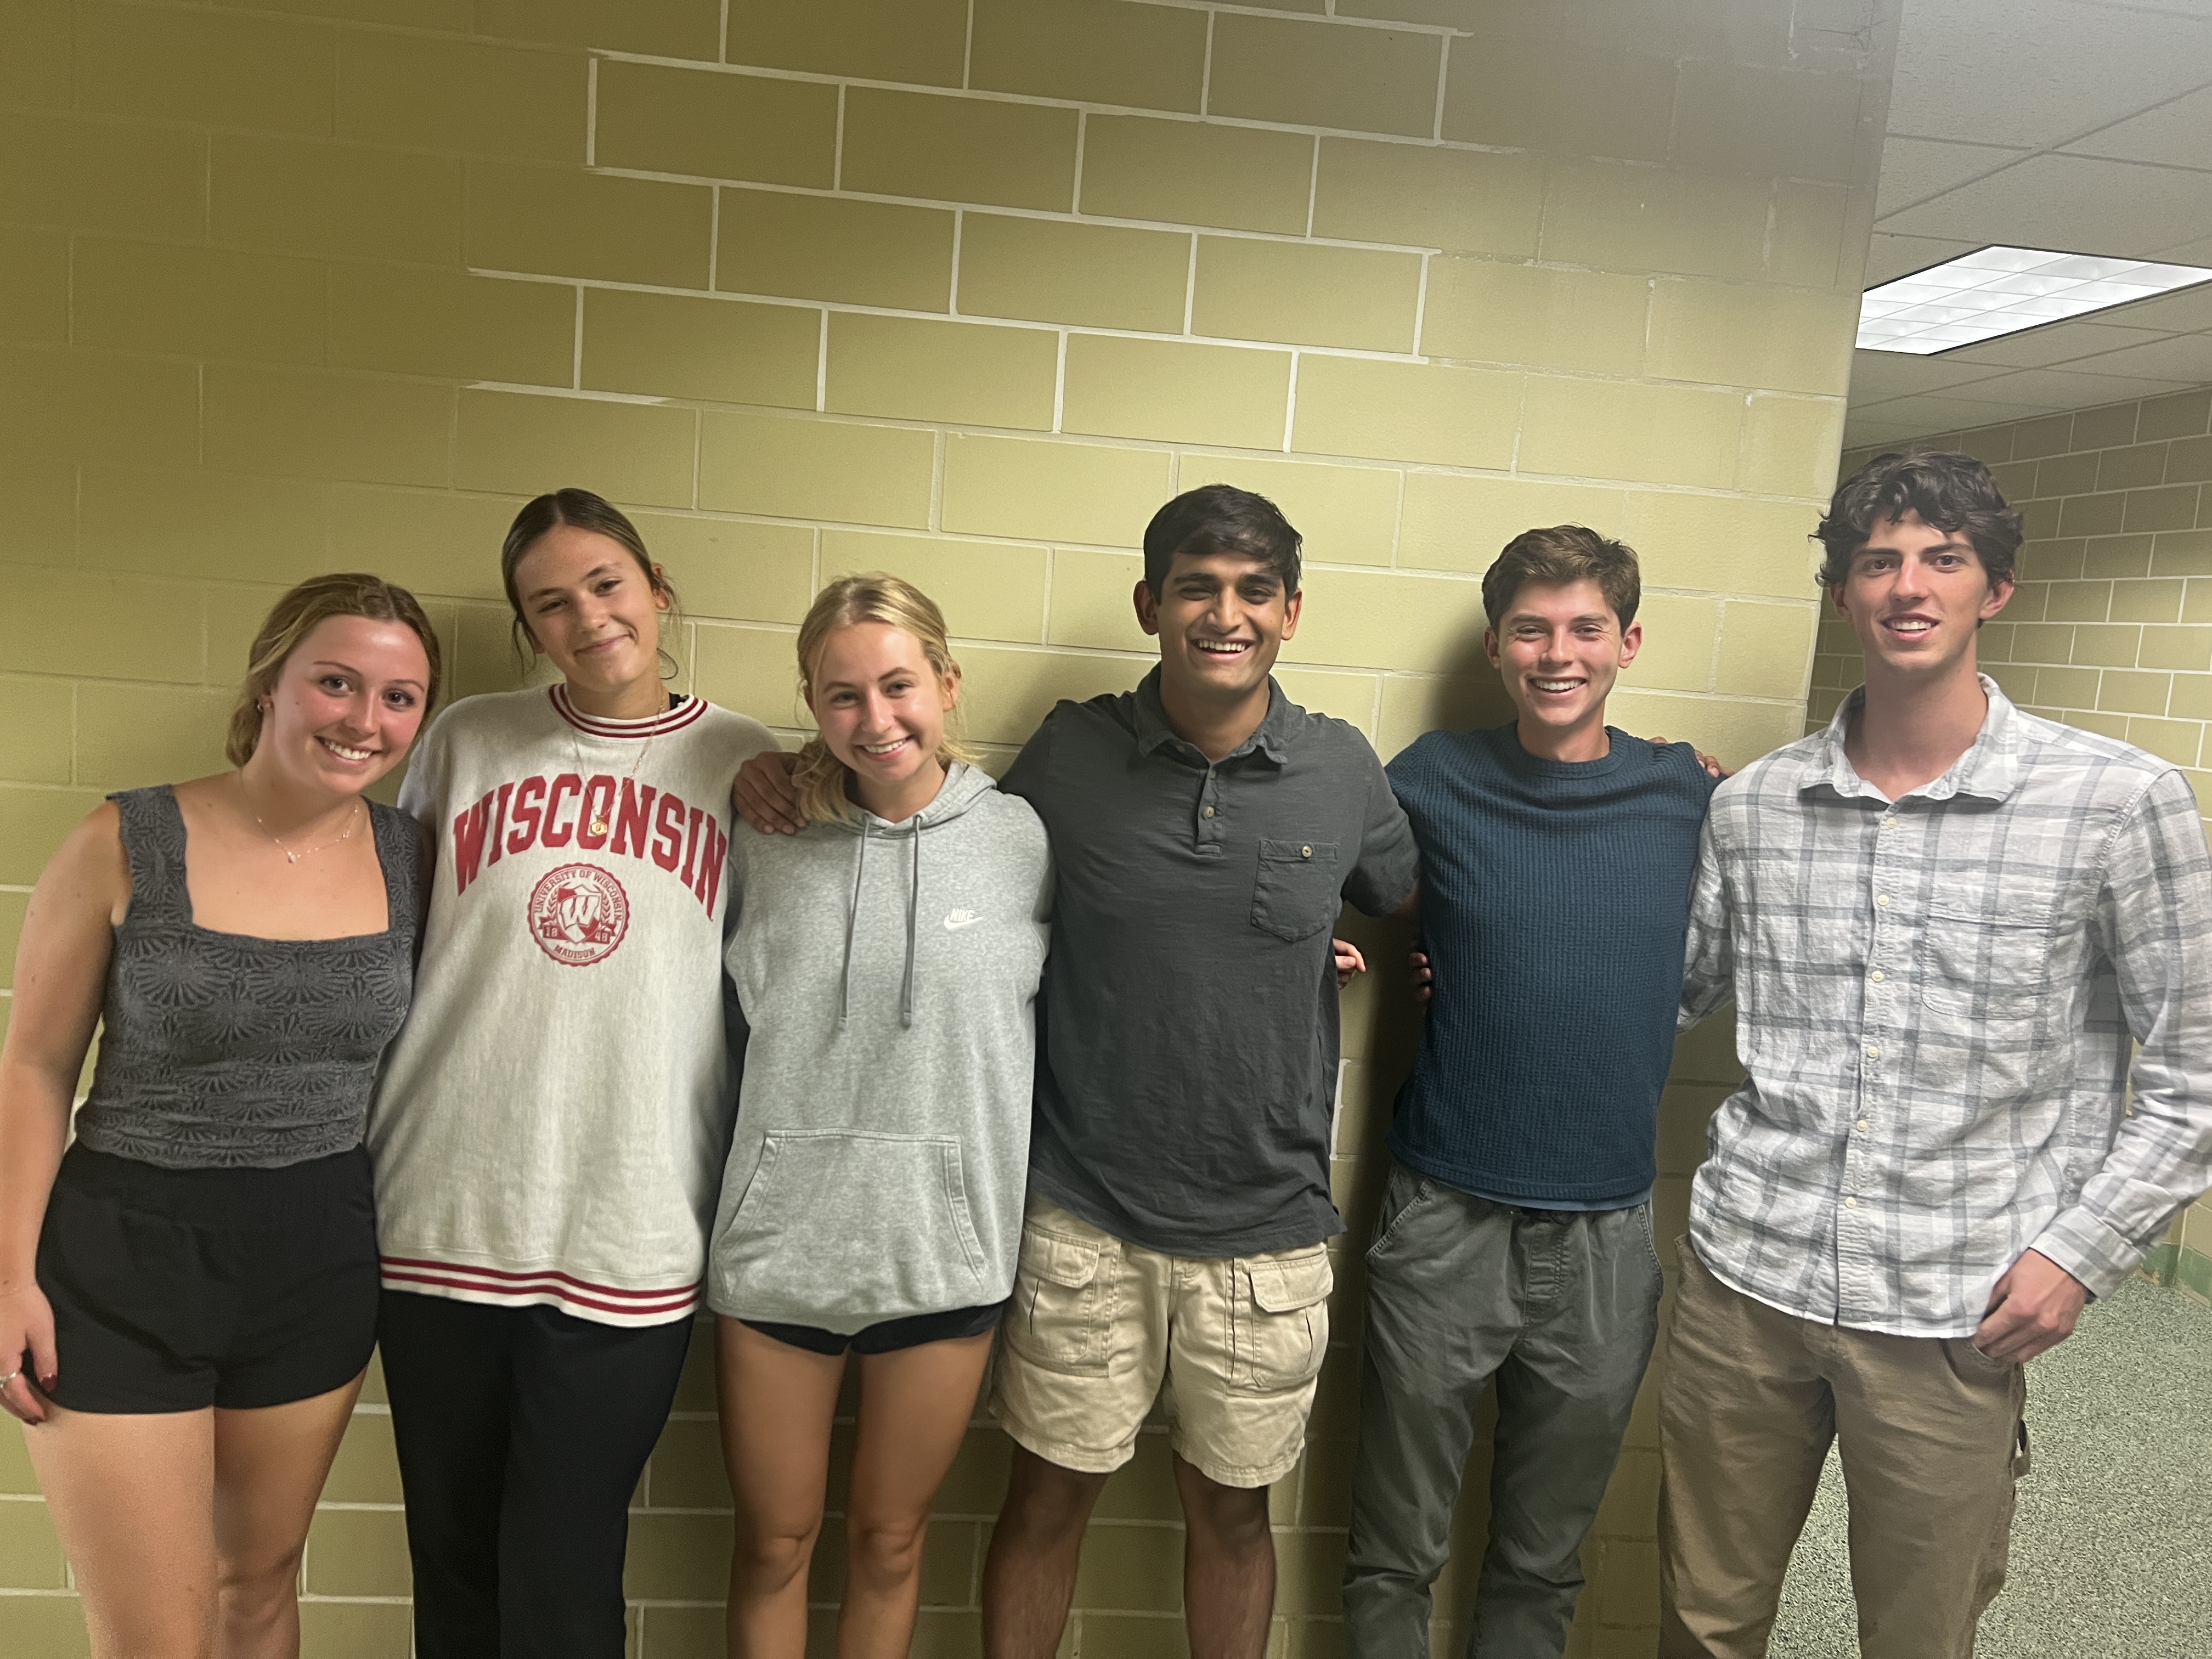 Meet the team! Order from left to right: Adriana Nickels, Isabelle Counts, Lucy Hockerman, Harshal Kanade, Riley Smith, Ryan Granowski